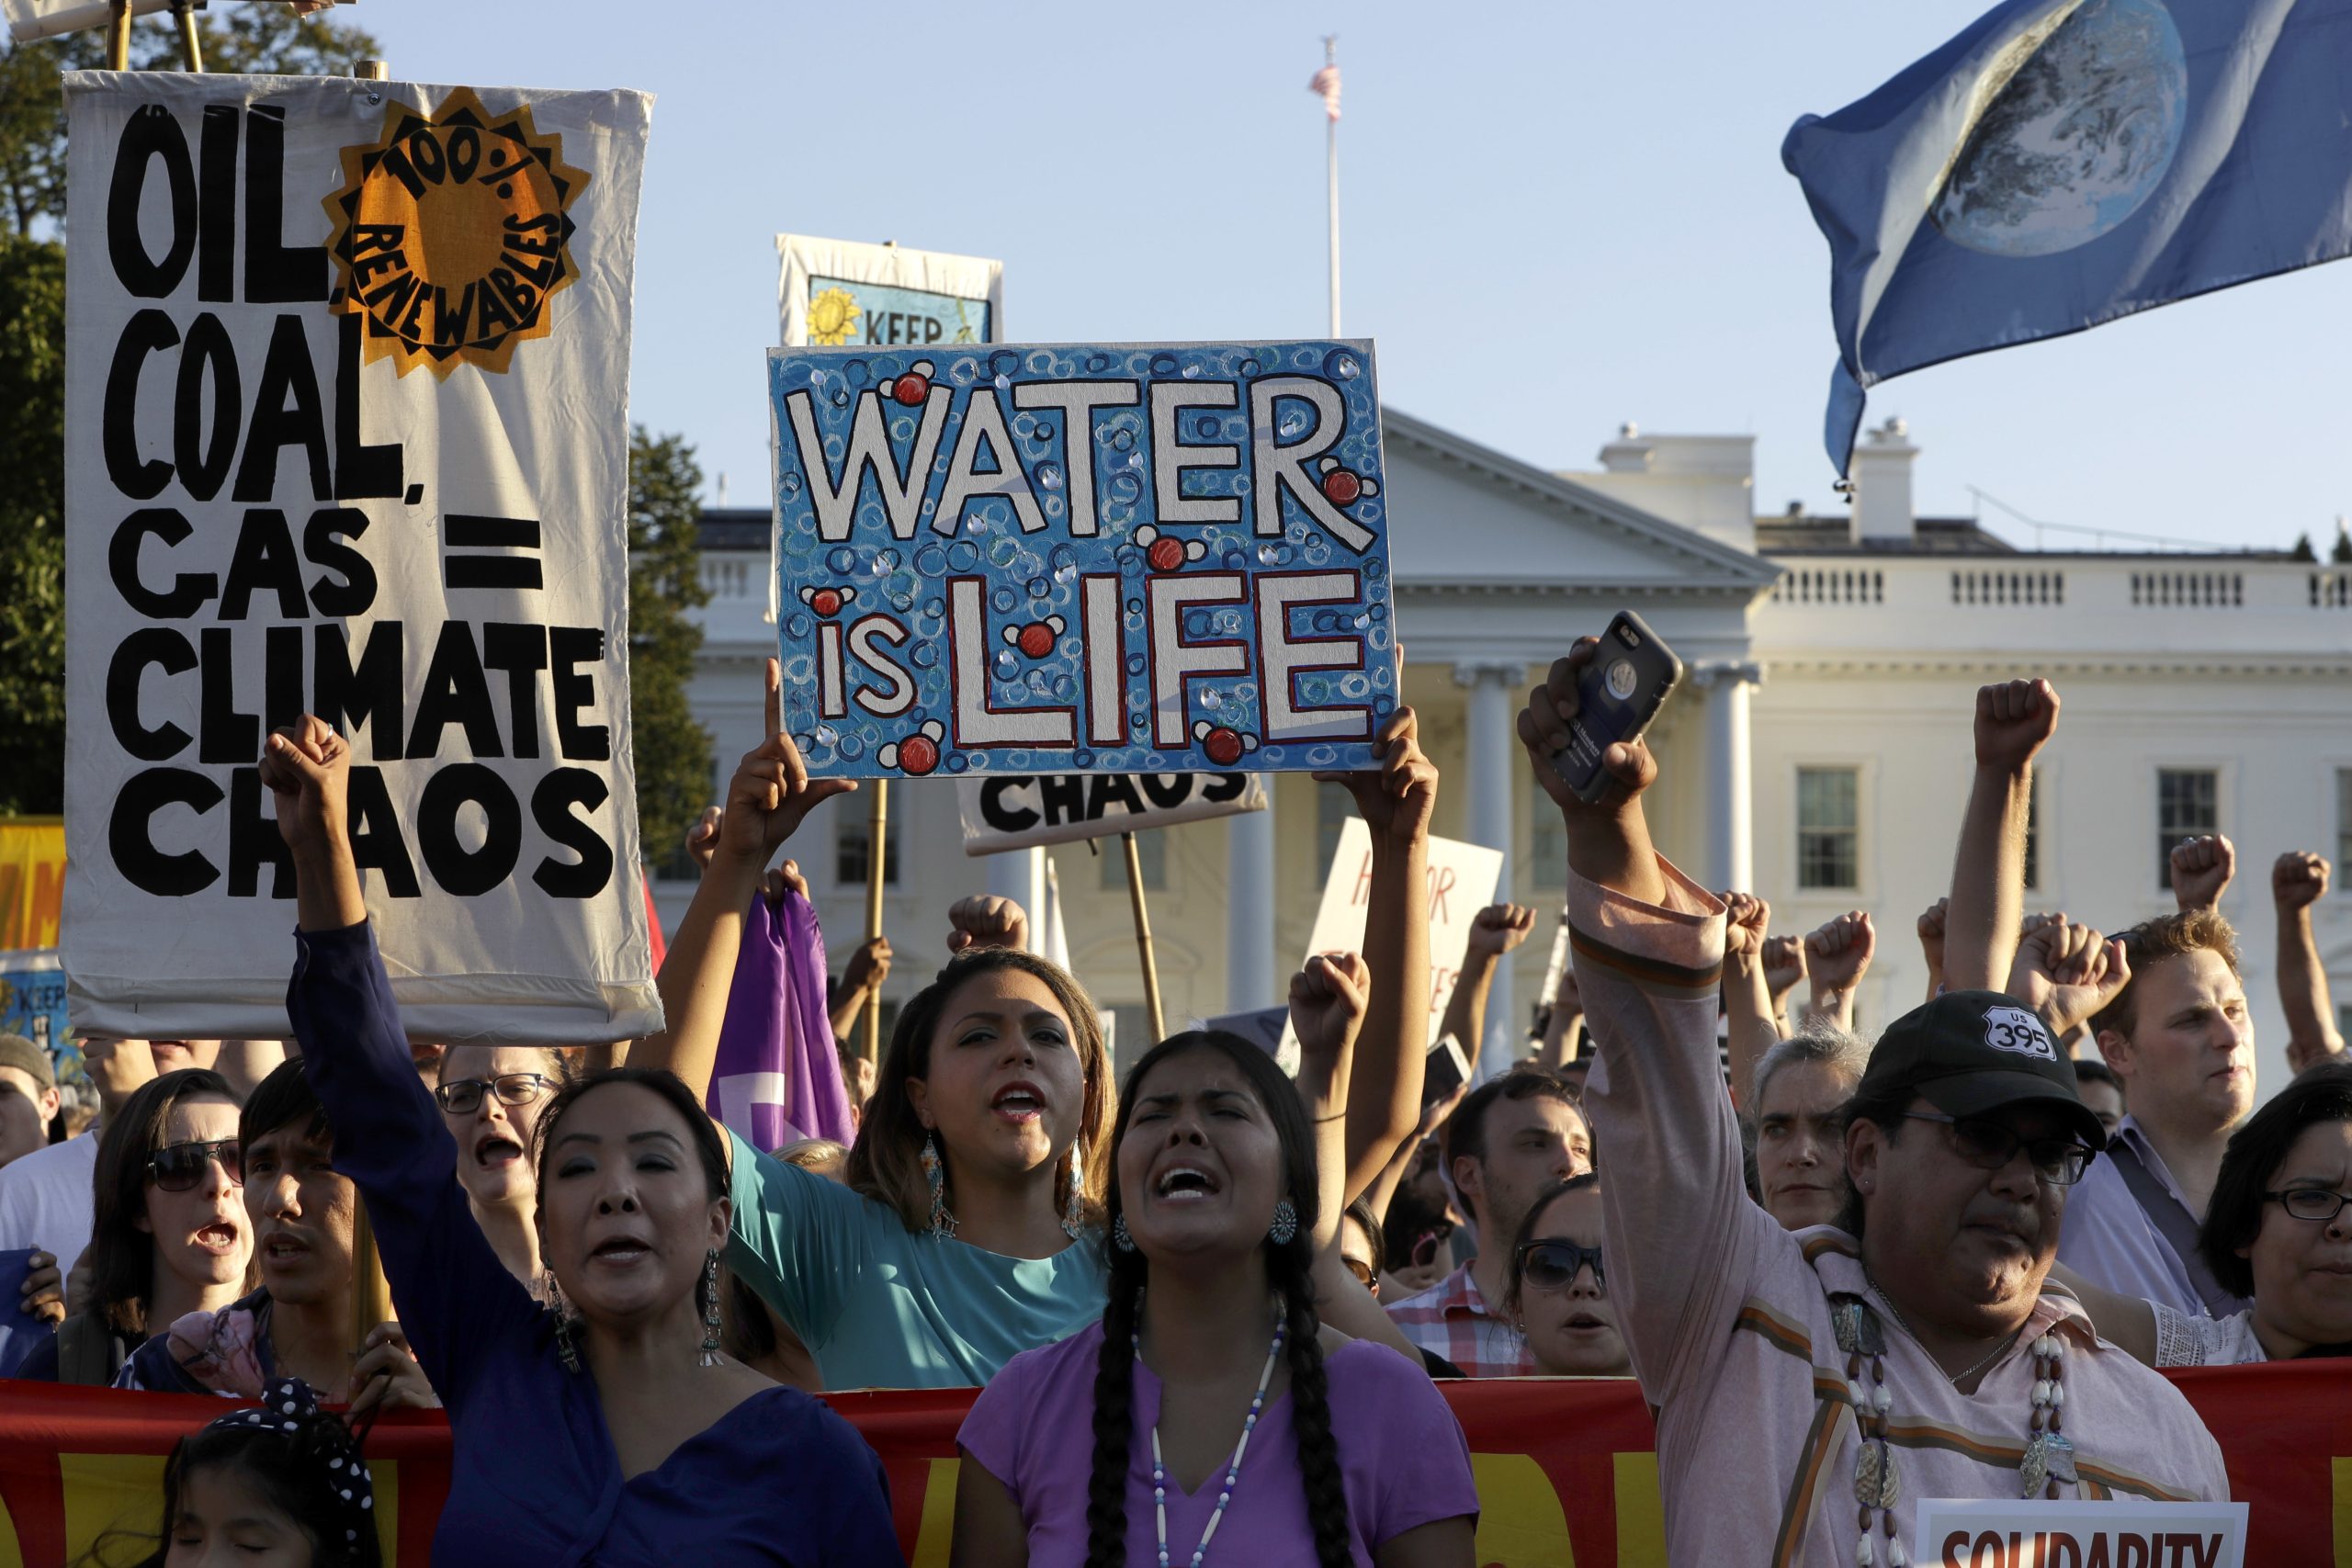 Supporters of the Standing Rock Sioux Tribe rally in opposition of the Dakota Access oil pipeline in front of the White House in September 2016.